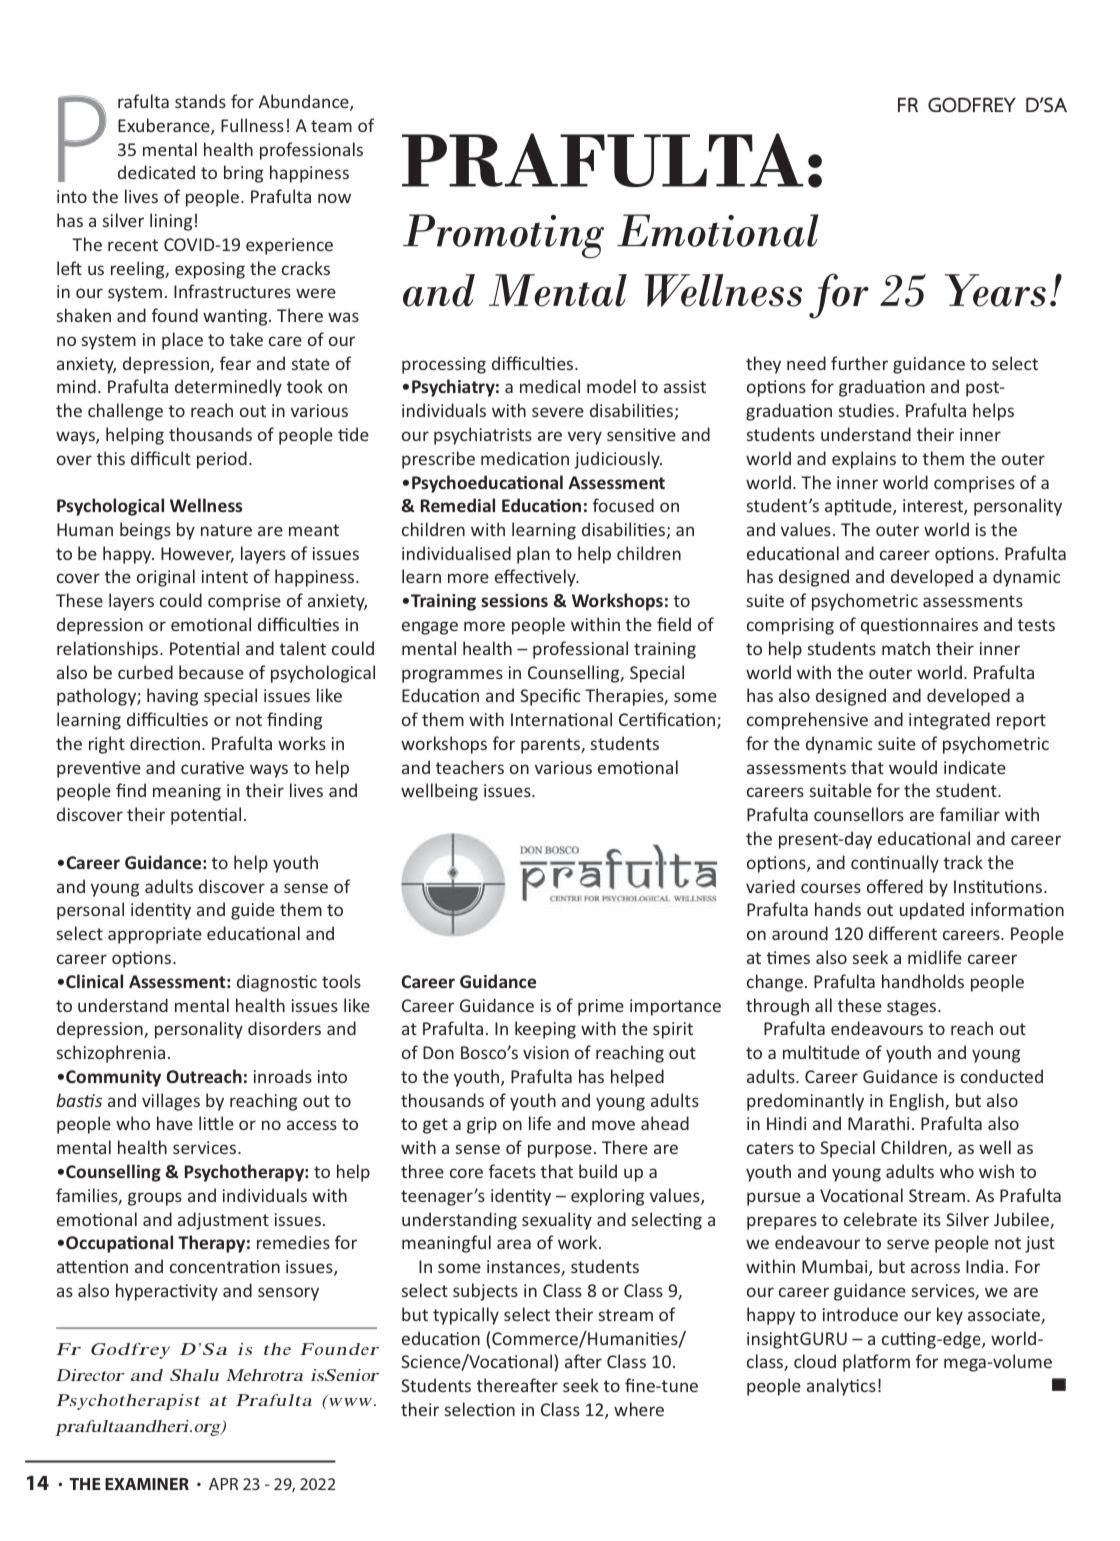 Promoting Emotional Wellbeing and Mental Wellness for 25 years